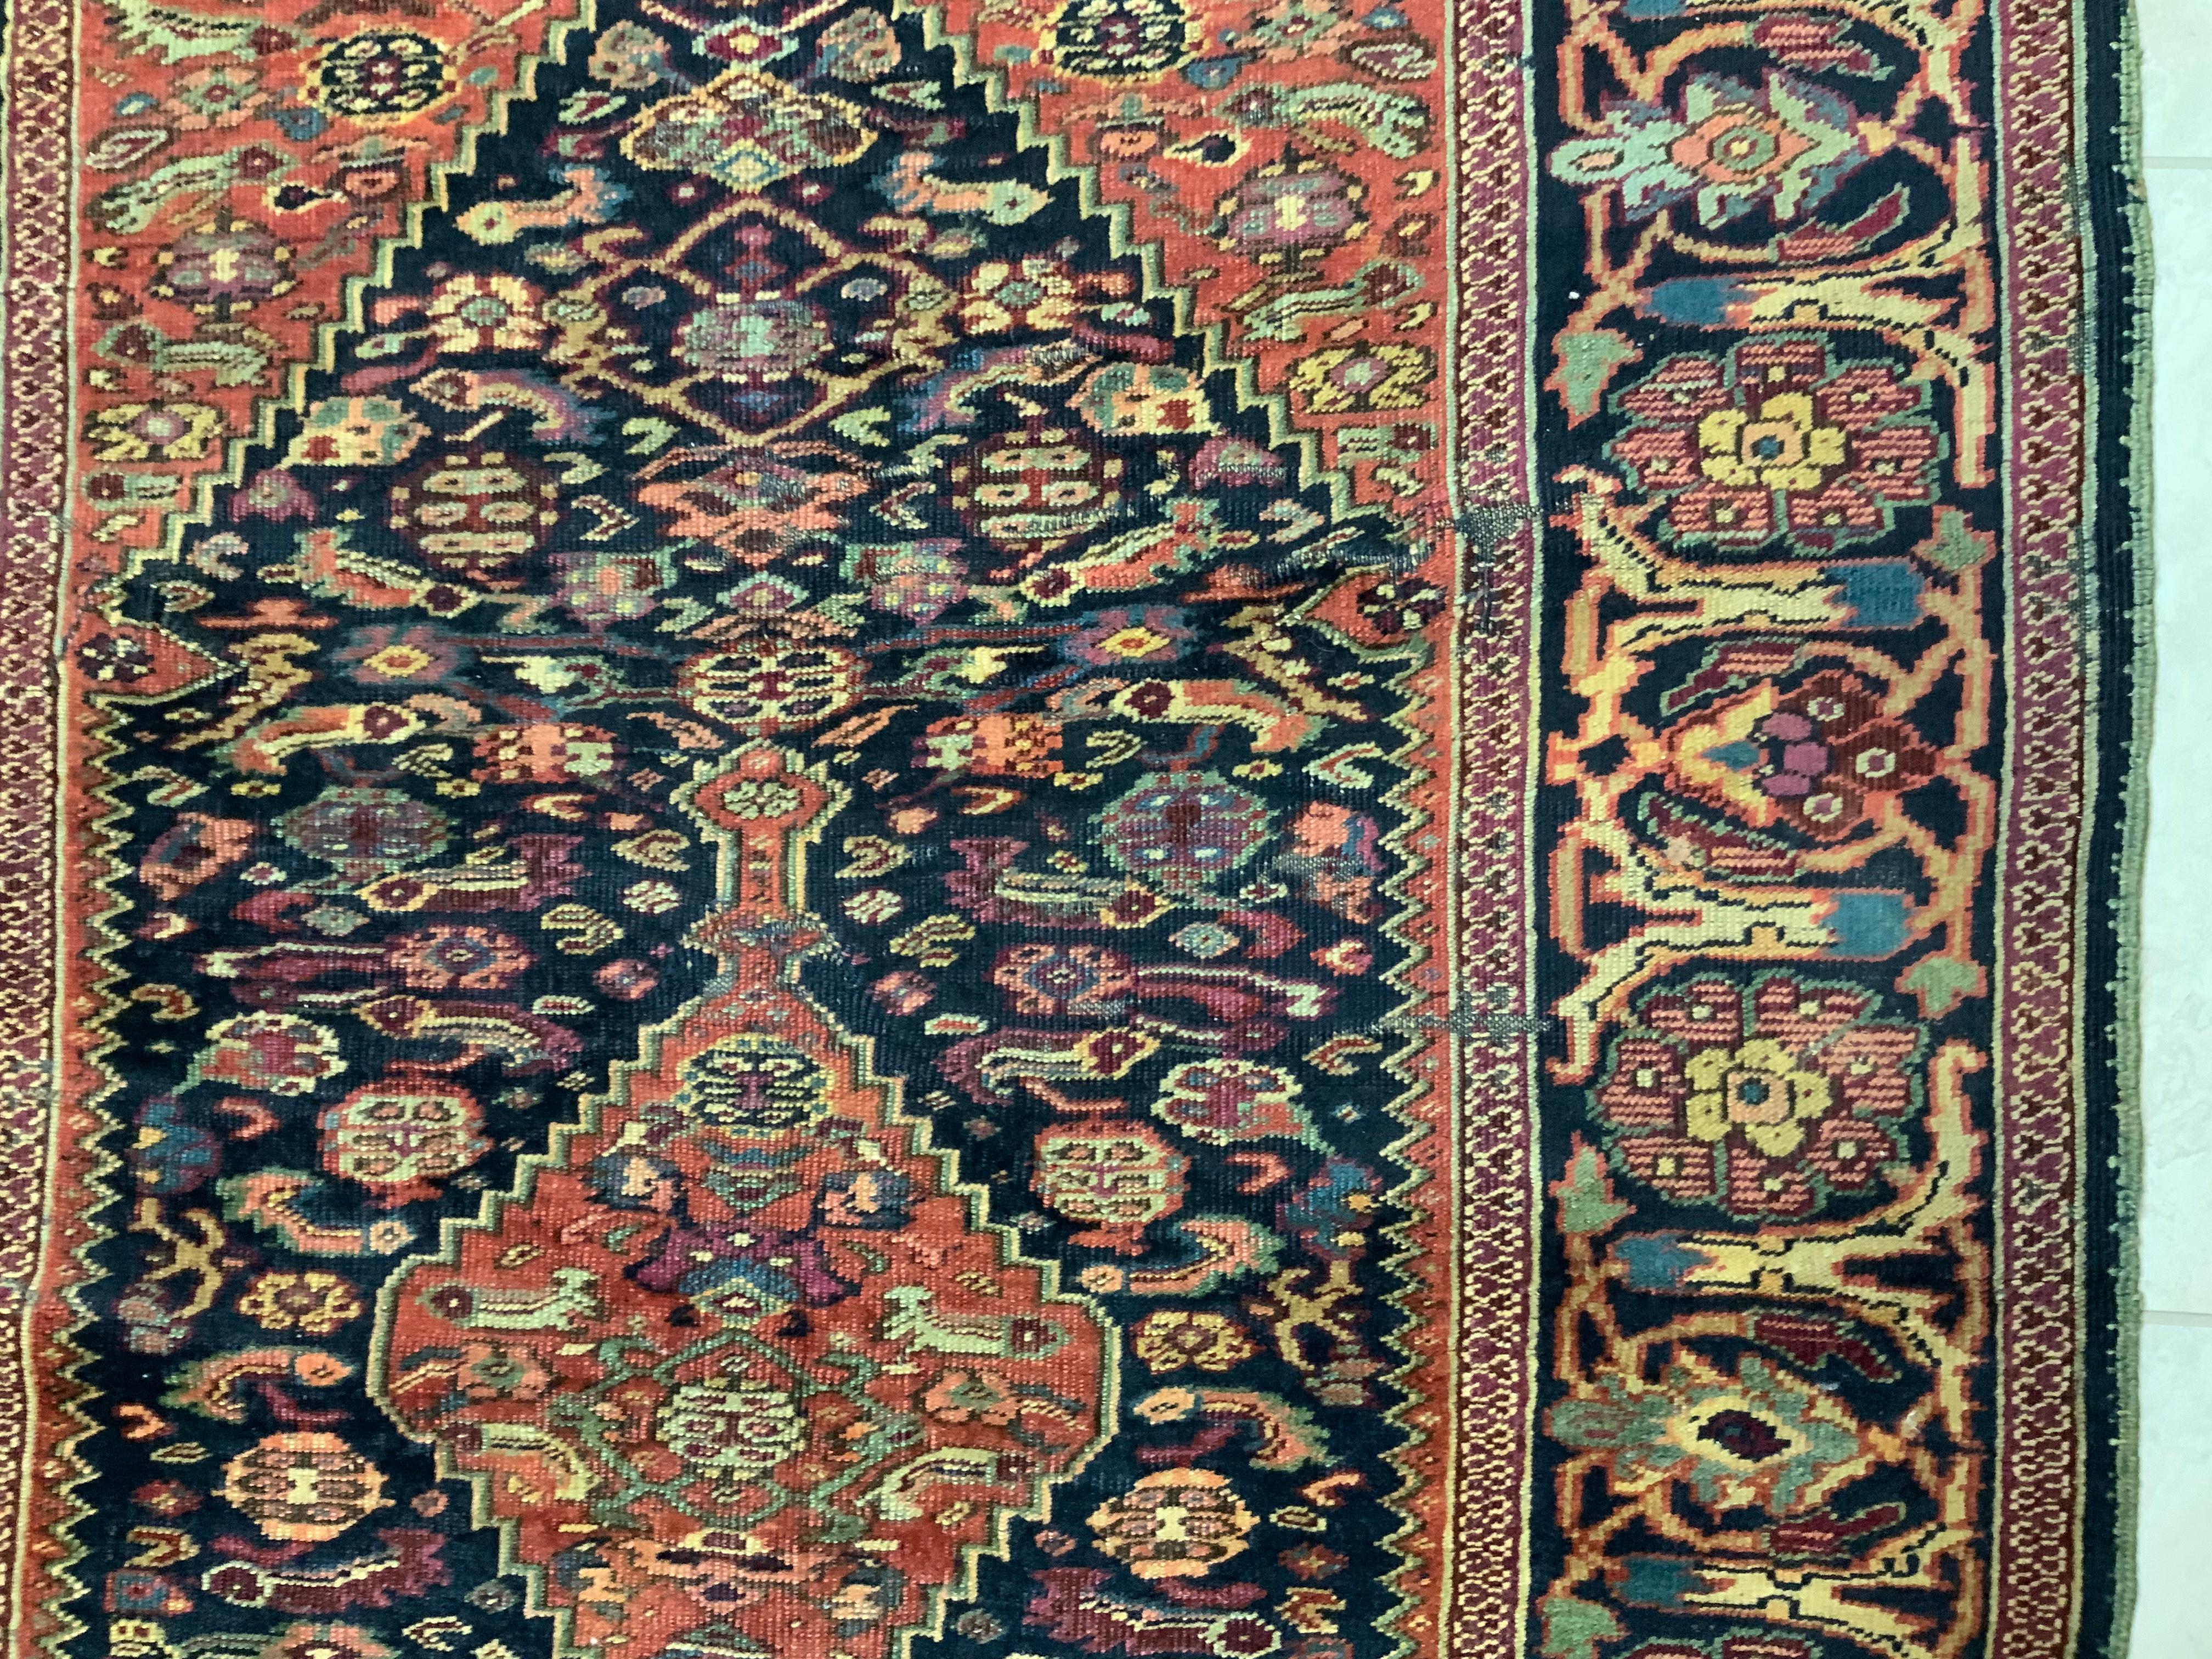 Hand-Woven Antique Geometric Motifs Persian Rug For Sale